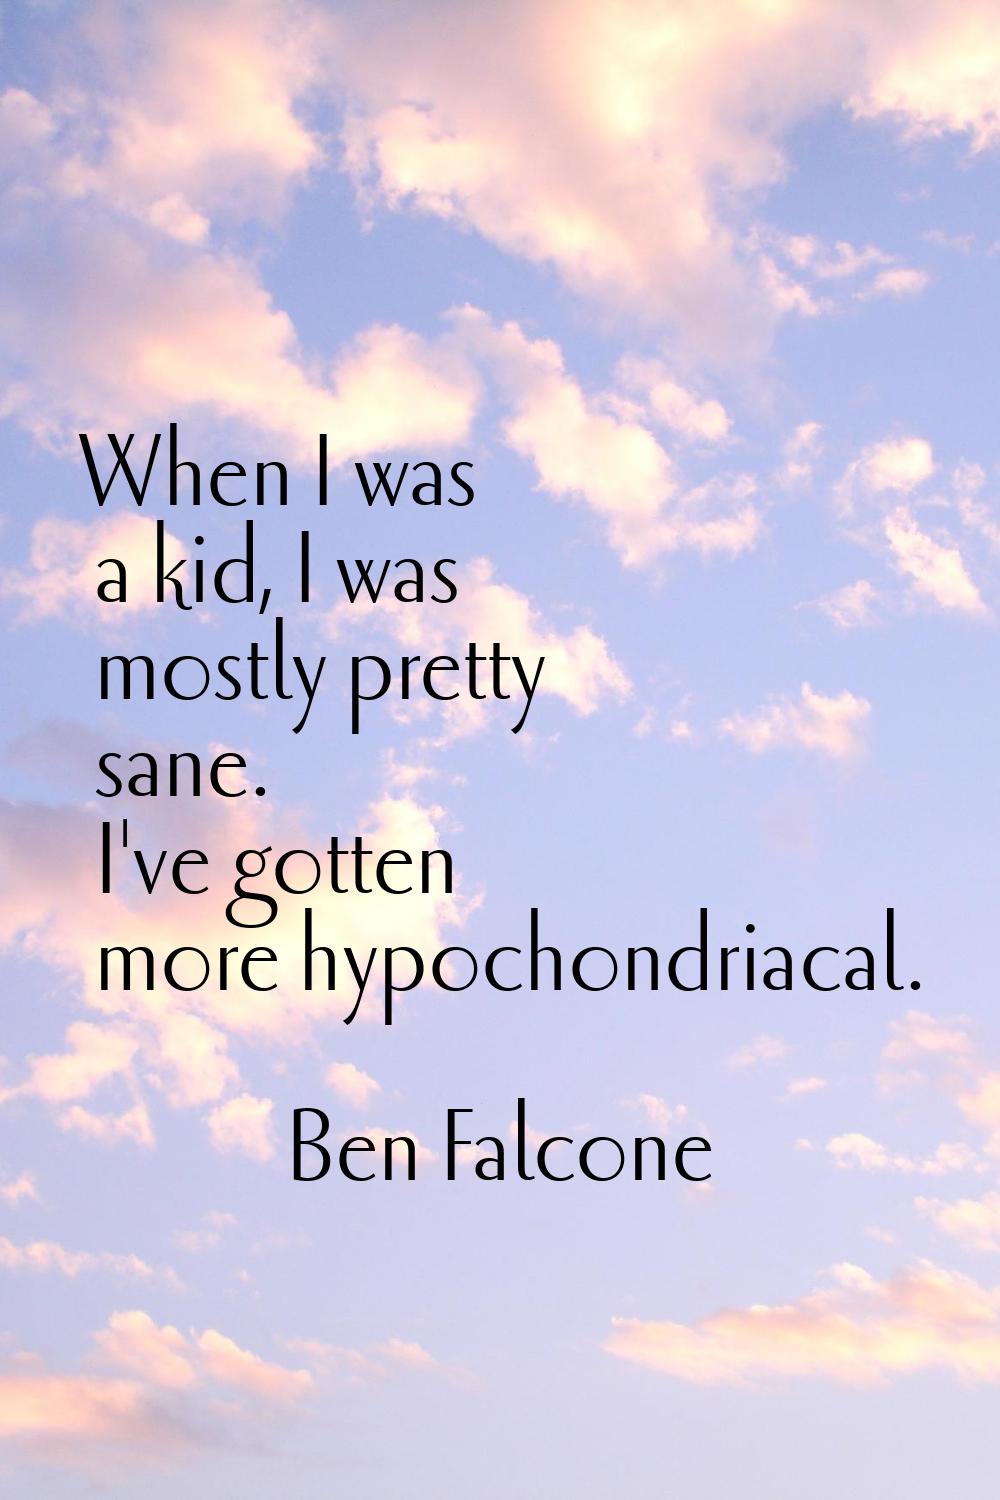 When I was a kid, I was mostly pretty sane. I've gotten more hypochondriacal.